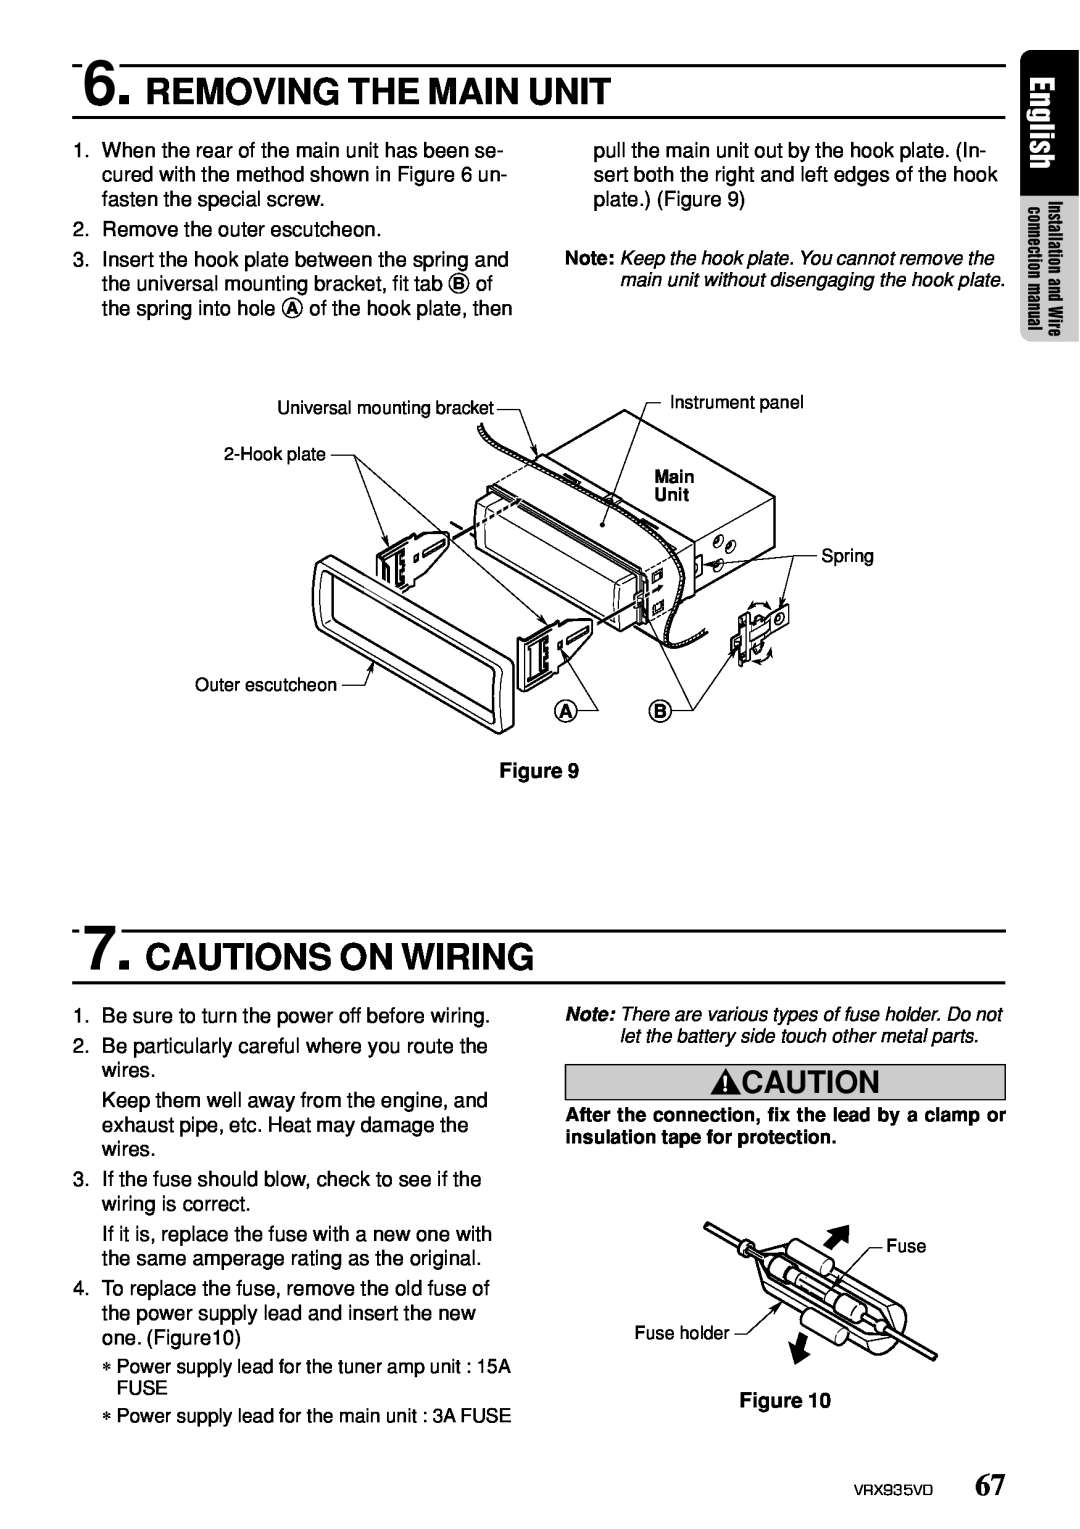 Clarion VRX935VD owner manual Removing The Main Unit, Cautions On Wiring 